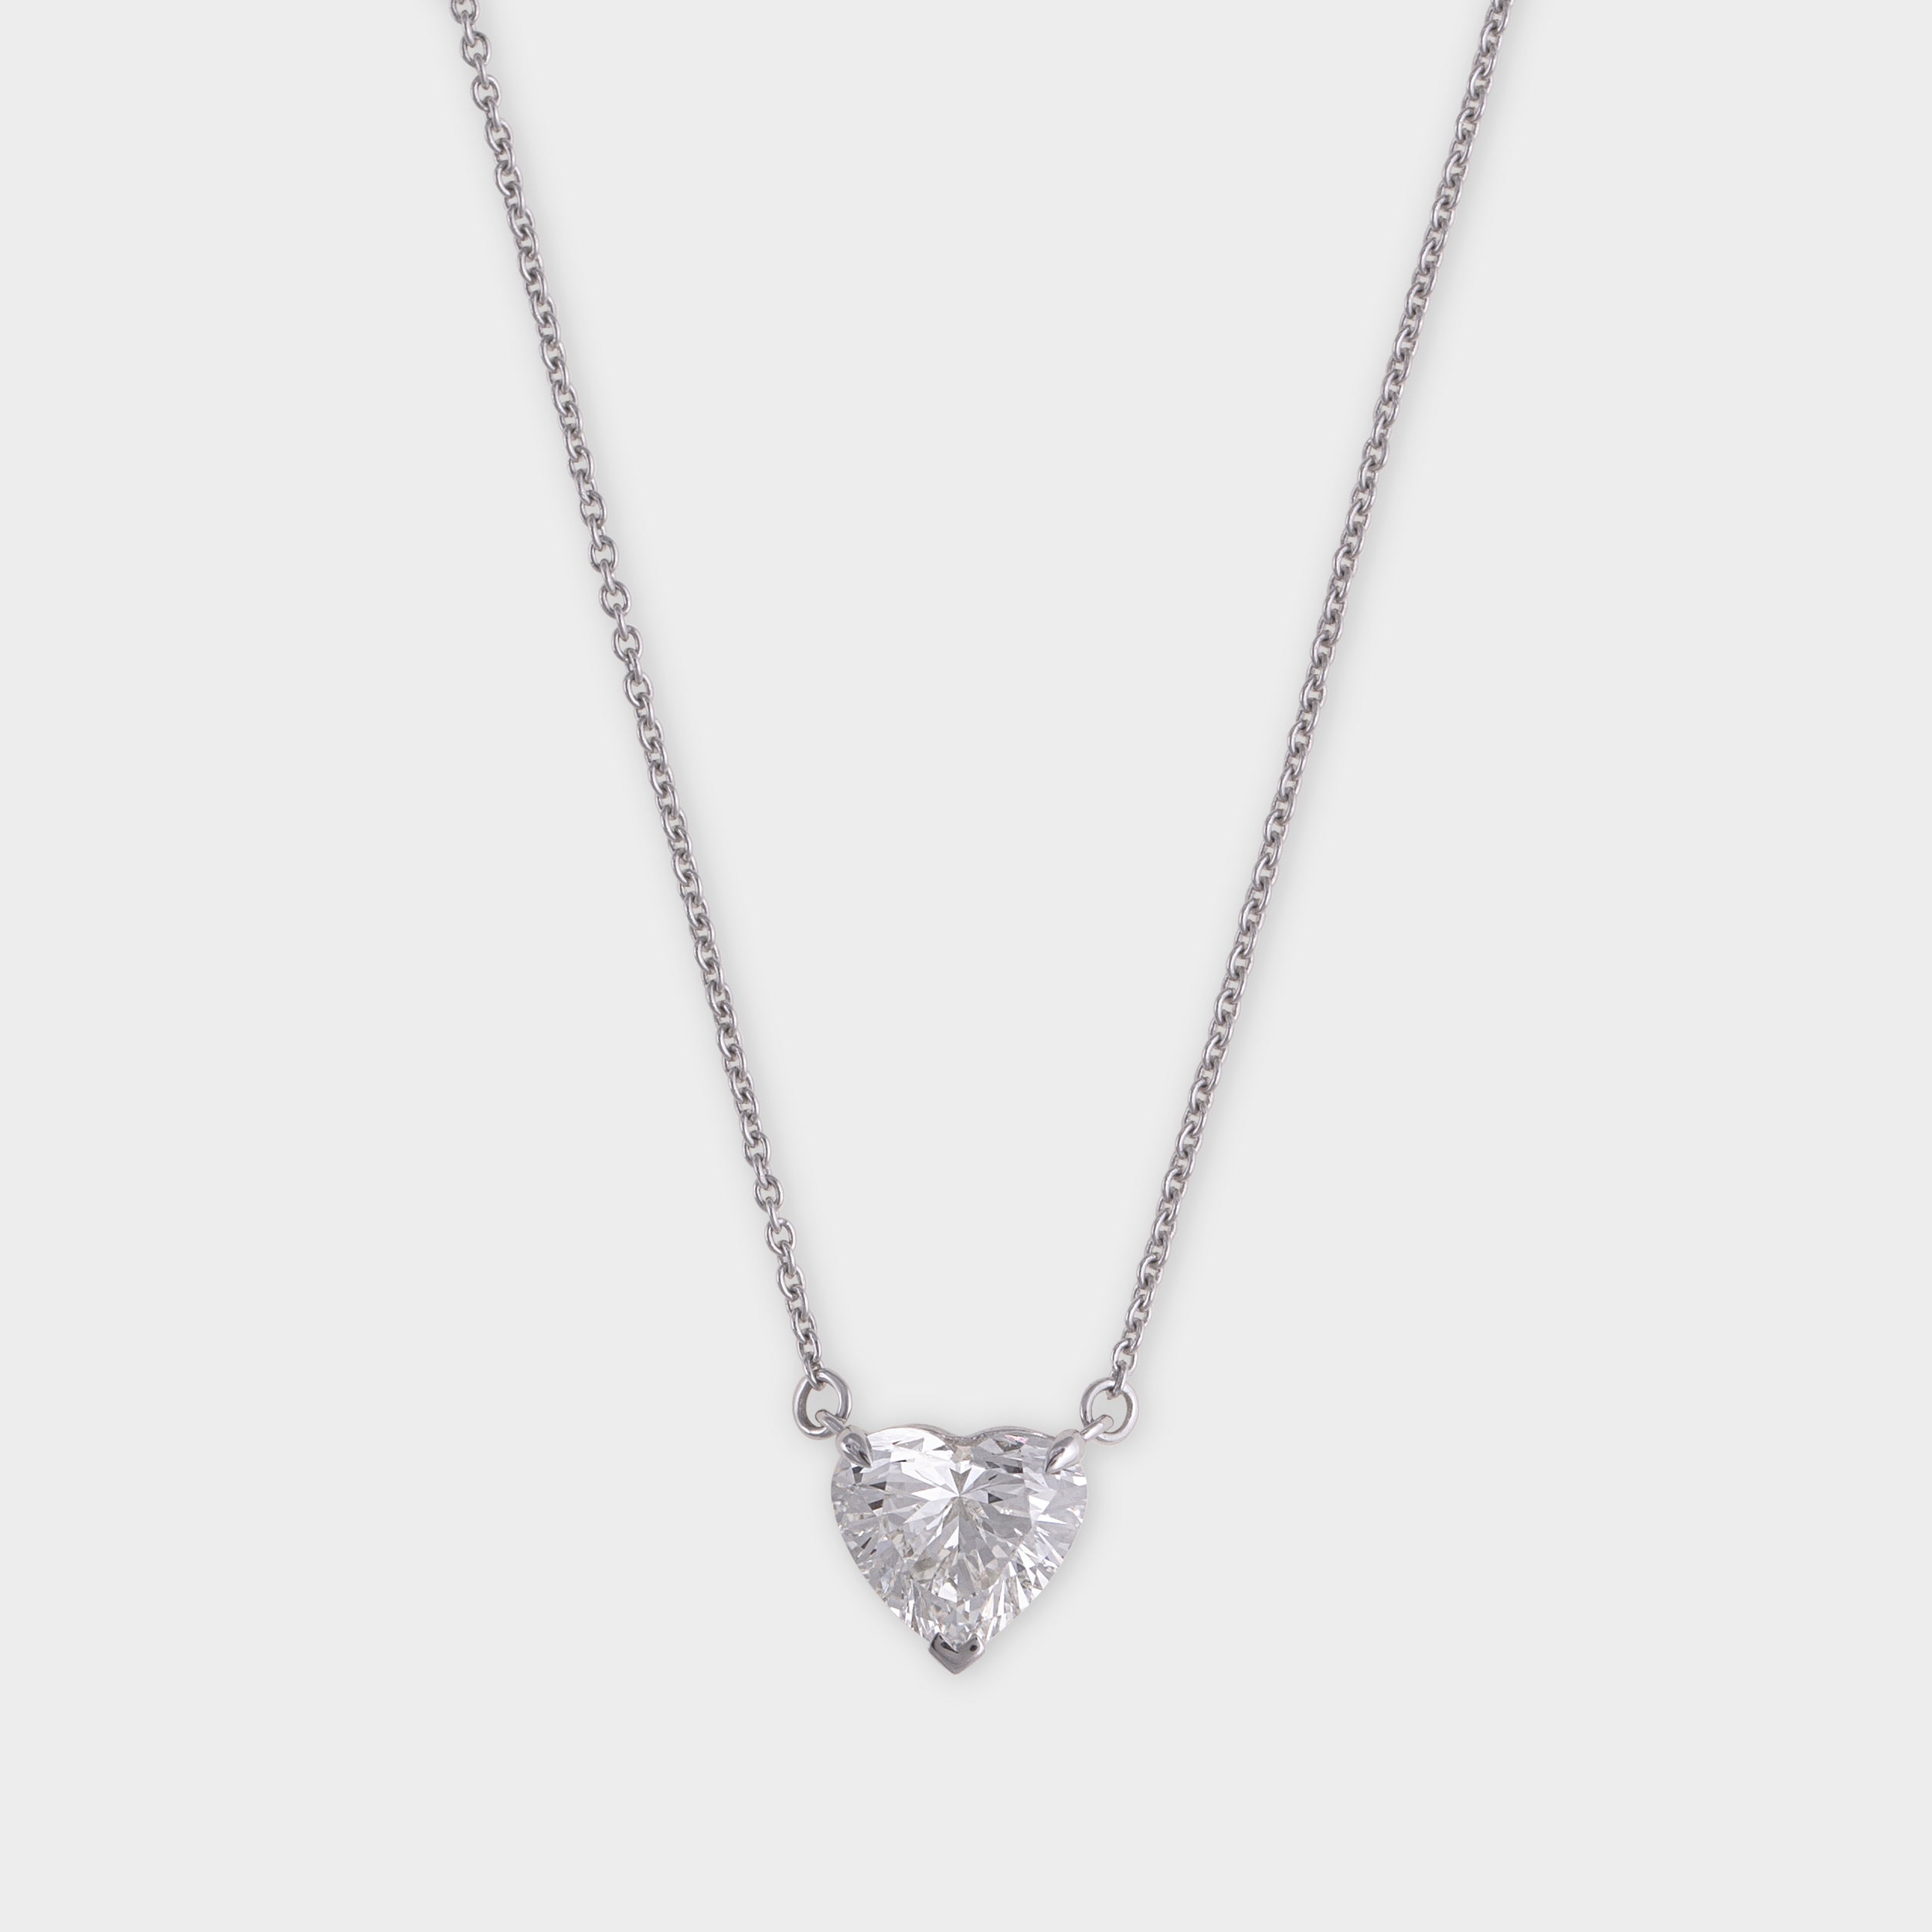 Eternal Love: Heart-Shaped Lab Grown Diamond Solitaire Pendant in White Gold Chain | SKU : 0019787039